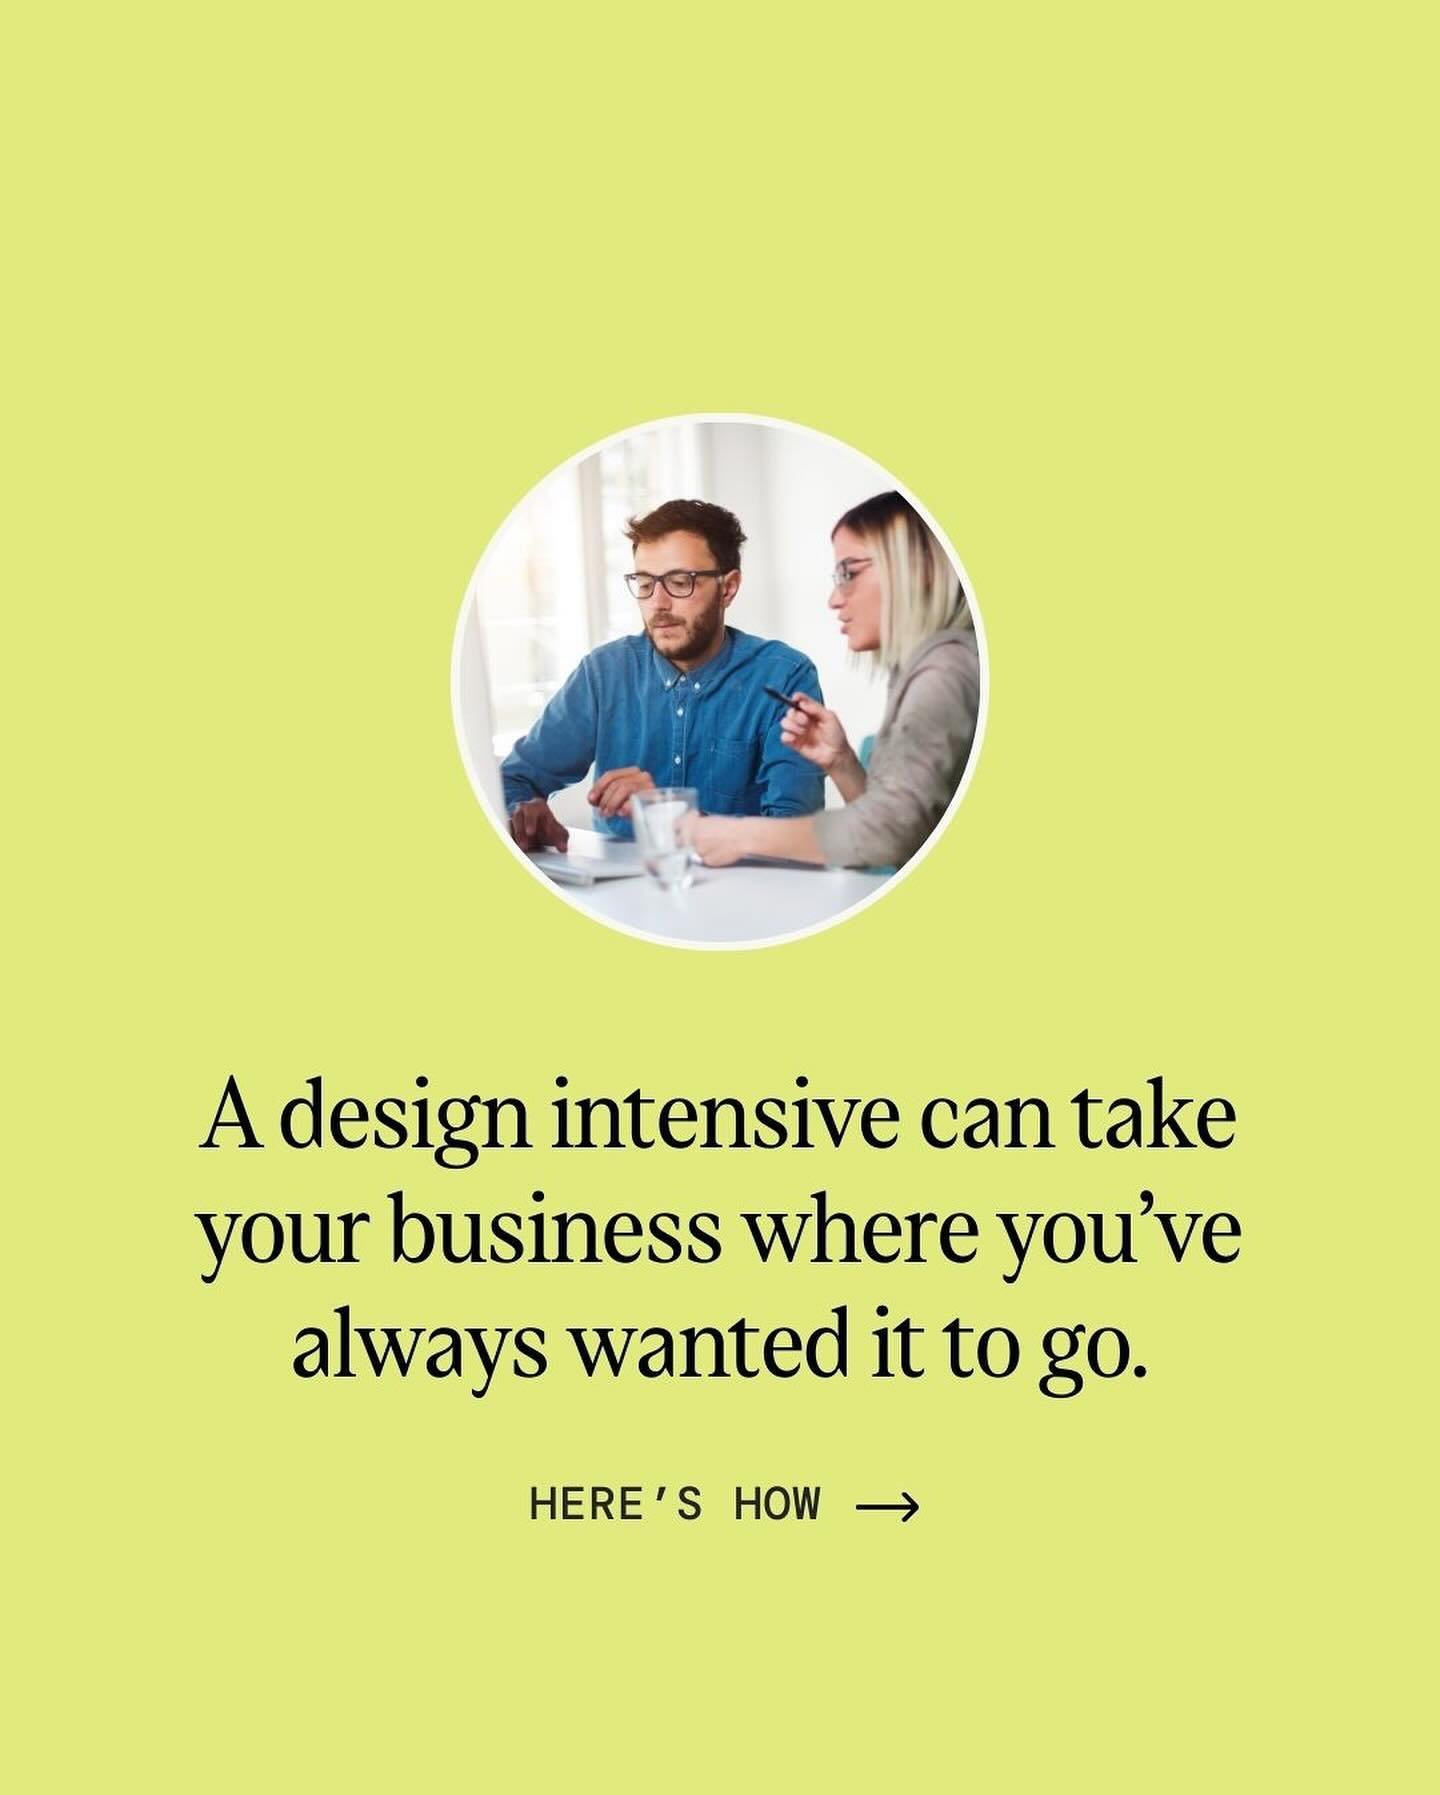 One day. A new visual identity or a new website. Immediate impact&mdash;that&rsquo;s the power of Contraire&rsquo;s Design Intensives. 💫

Perfect for small businesses in need of a revamp without heavy commitment.

With our team of seasoned designers